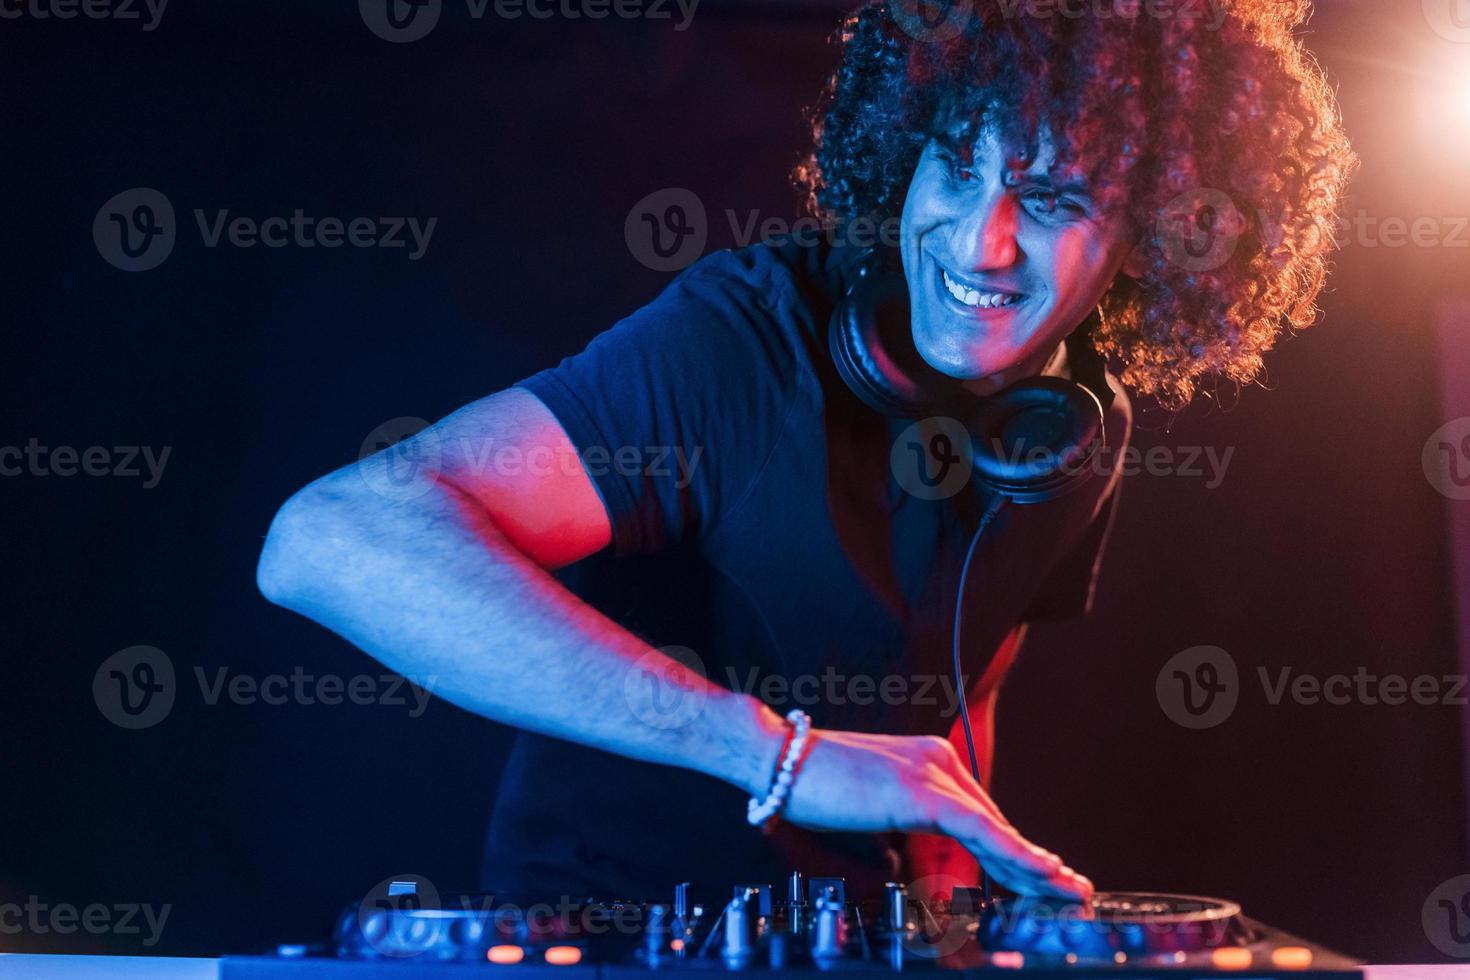 Man with curly hair using DJ equipment and standing in the dark neon lighted room photo